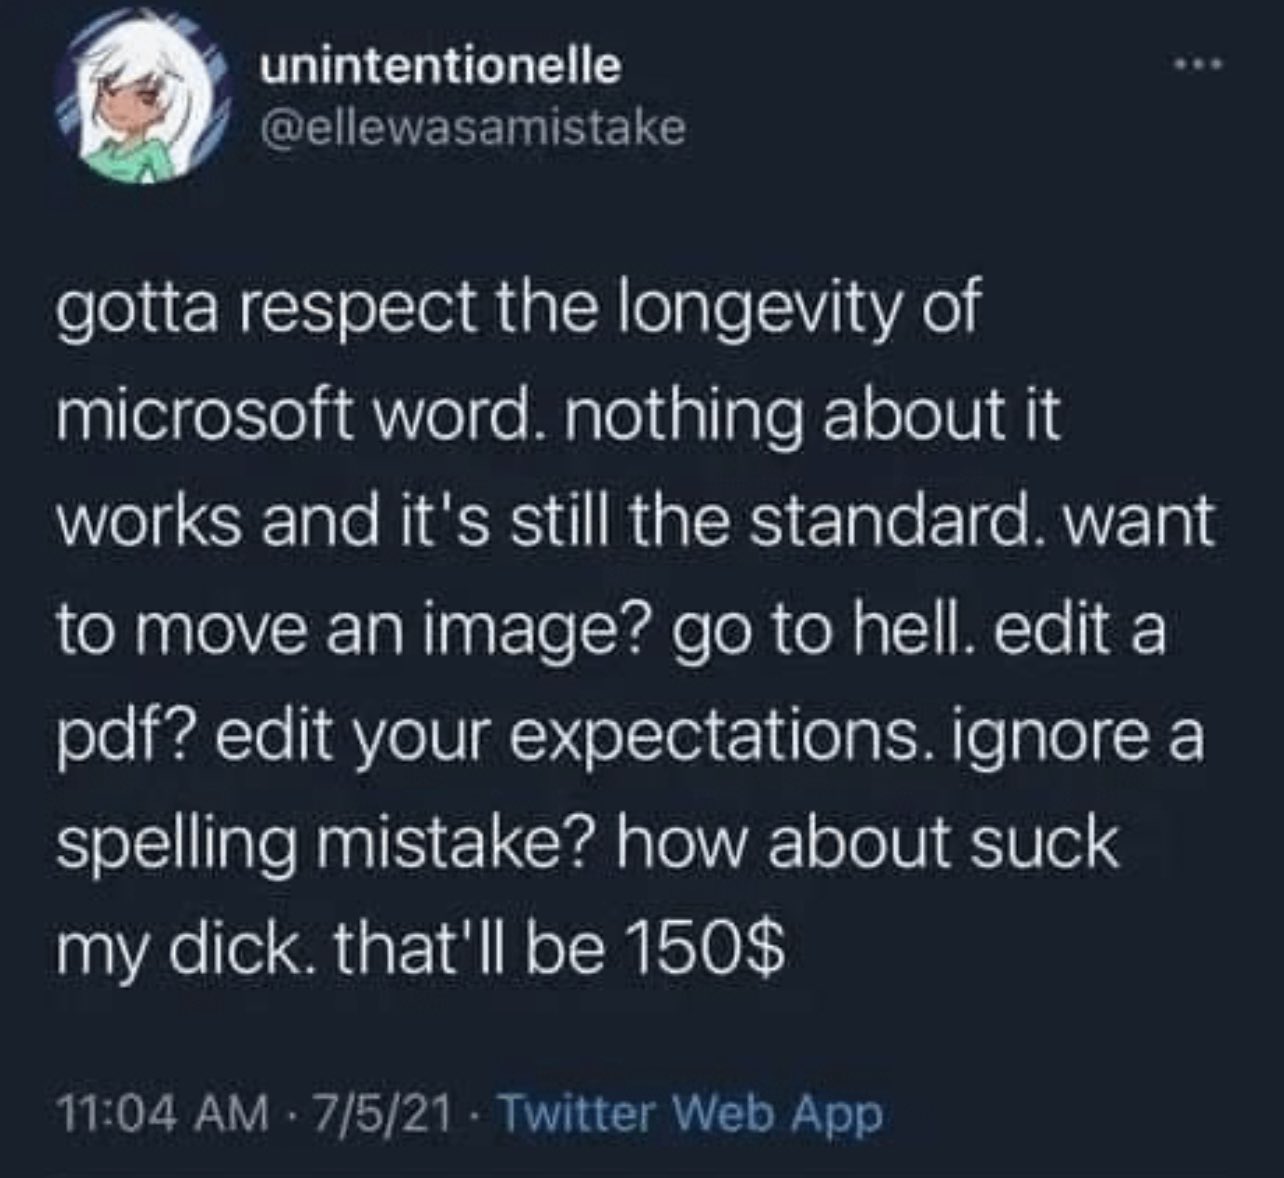 internet hall of  fame - microsoft word tweet meme - unintentionelle gotta respect the longevity of microsoft word. nothing about it works and it's still the standard. want to move an image? go to hell. edit a pdf? edit your expectations. ignore a spellin